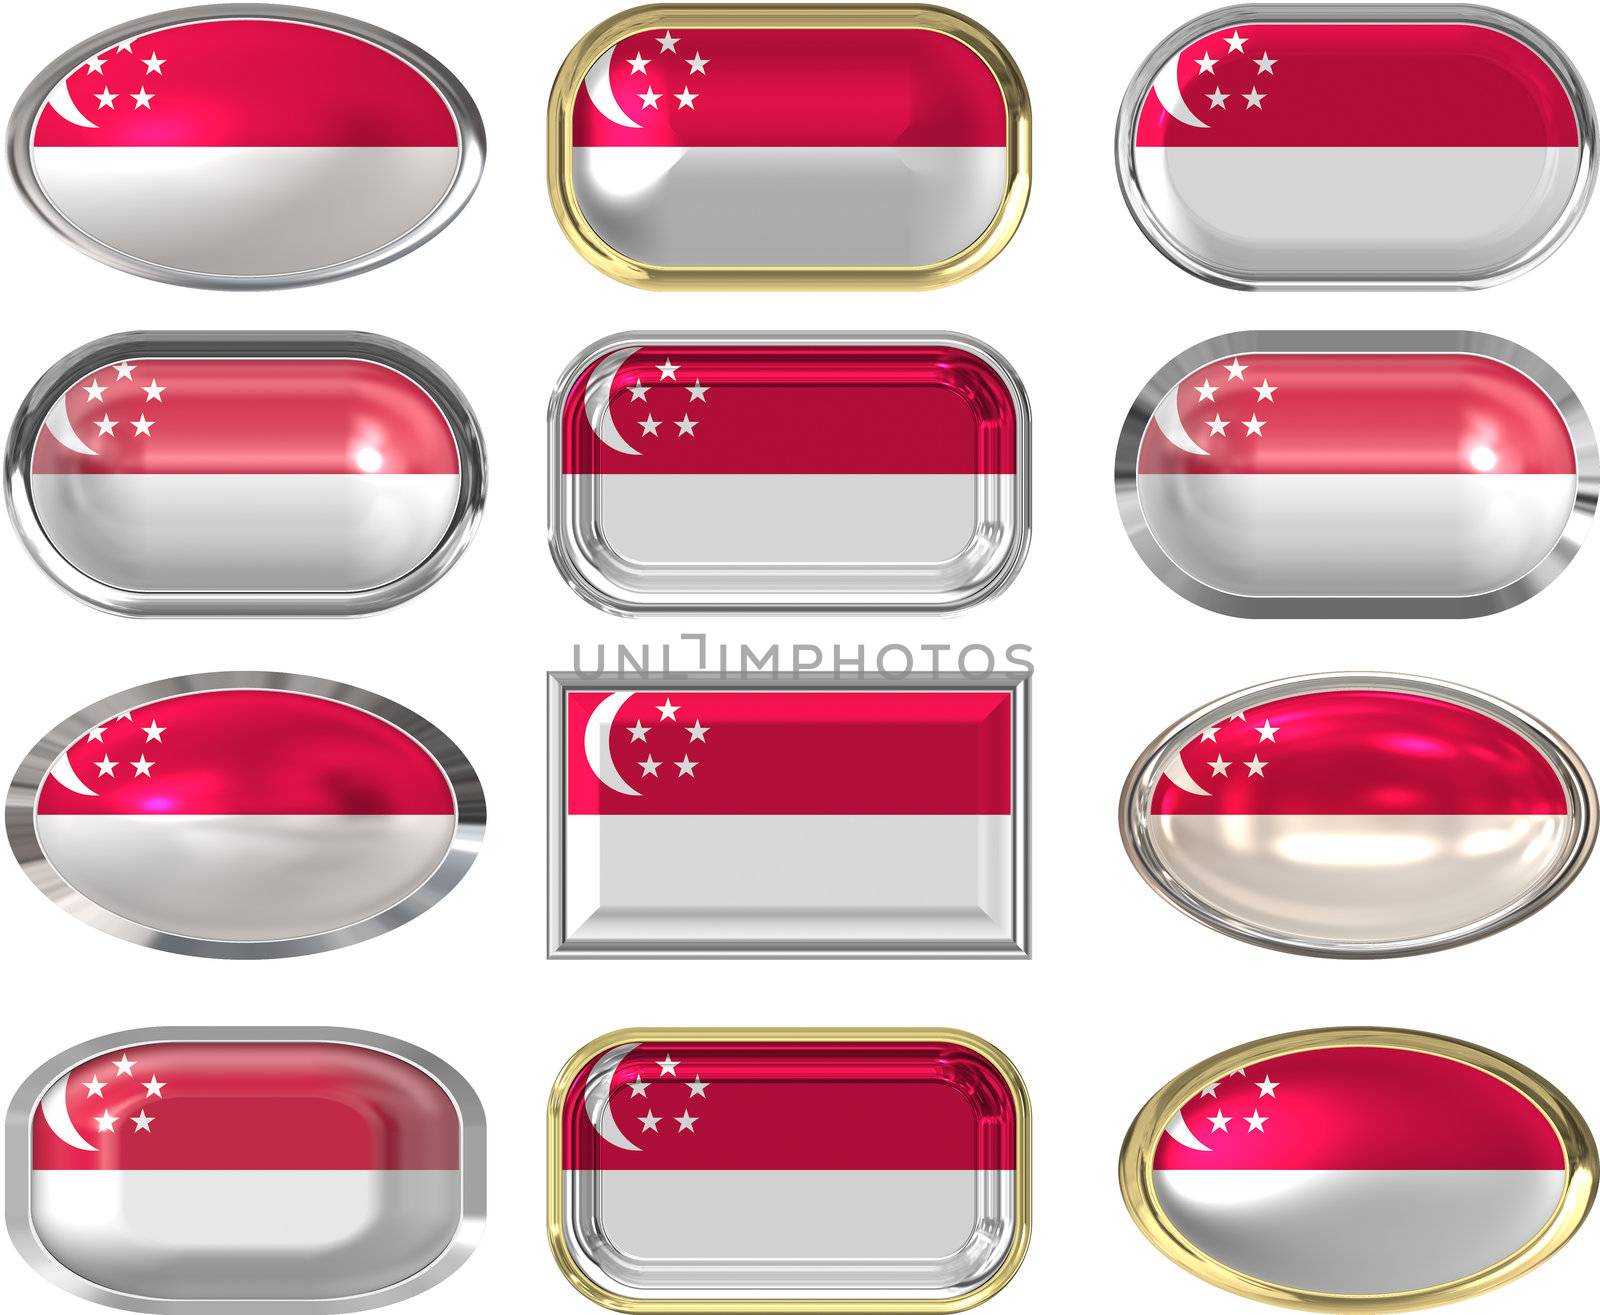 twelve Great buttons of the Flag of Singapore